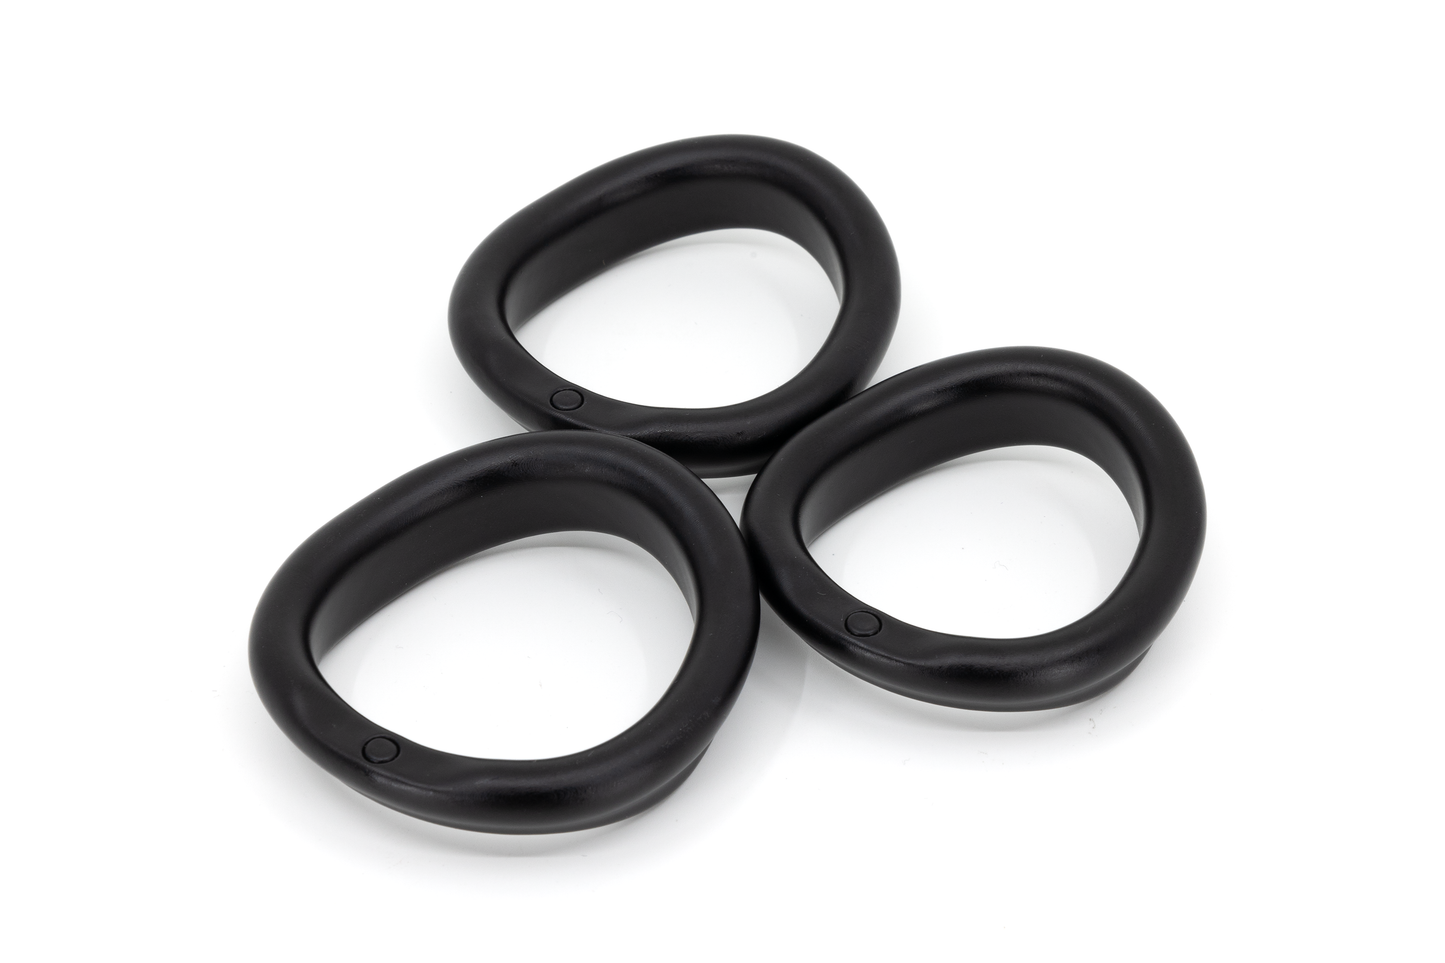 Mk1 Cock Ring Pack (48, 50, 52mm) - X-Large